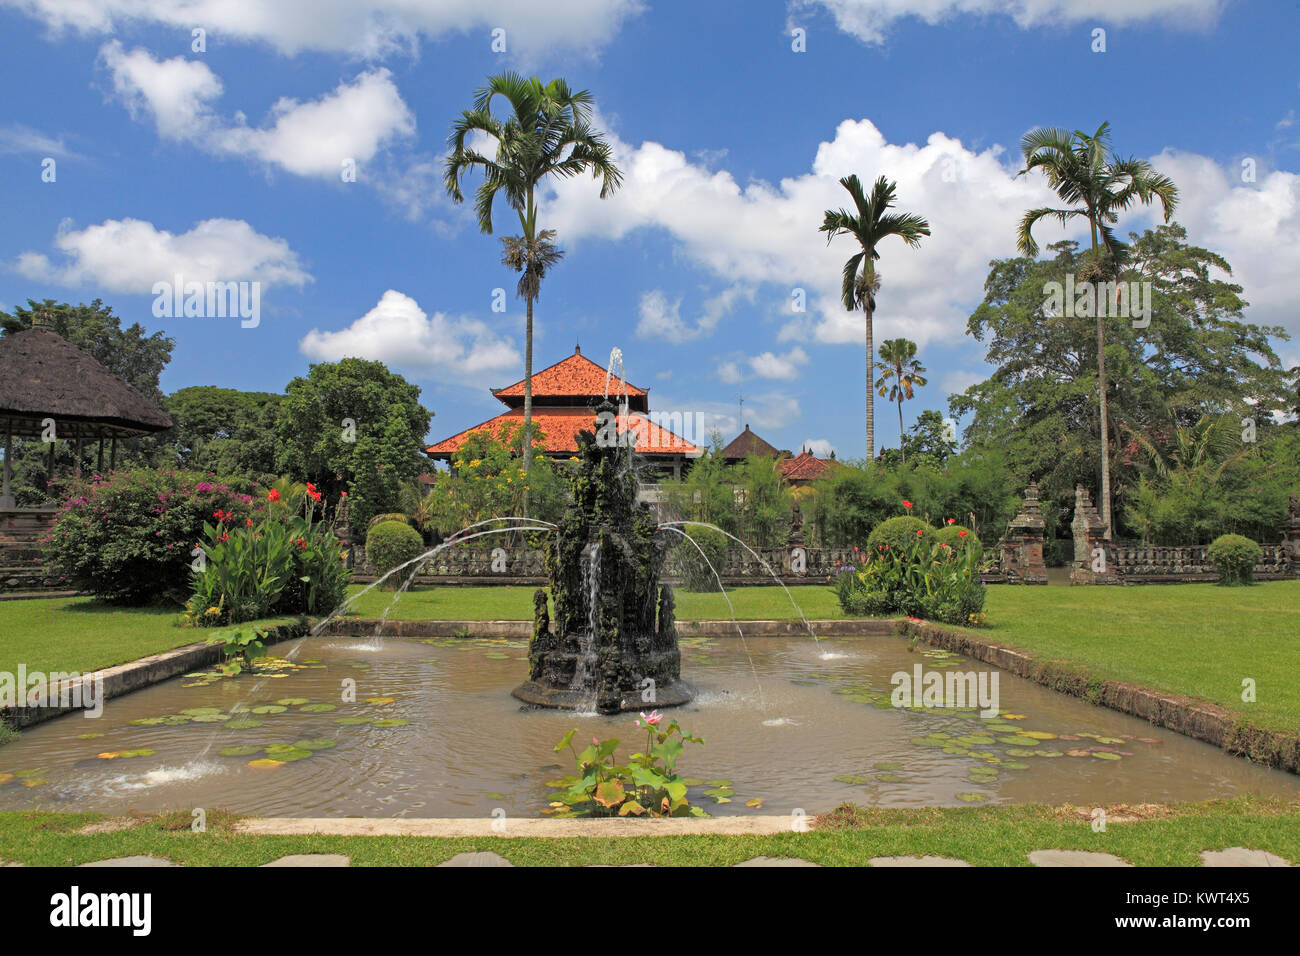 Fountain In The Grounds Of Pura Taman Ayun The Royal Temple